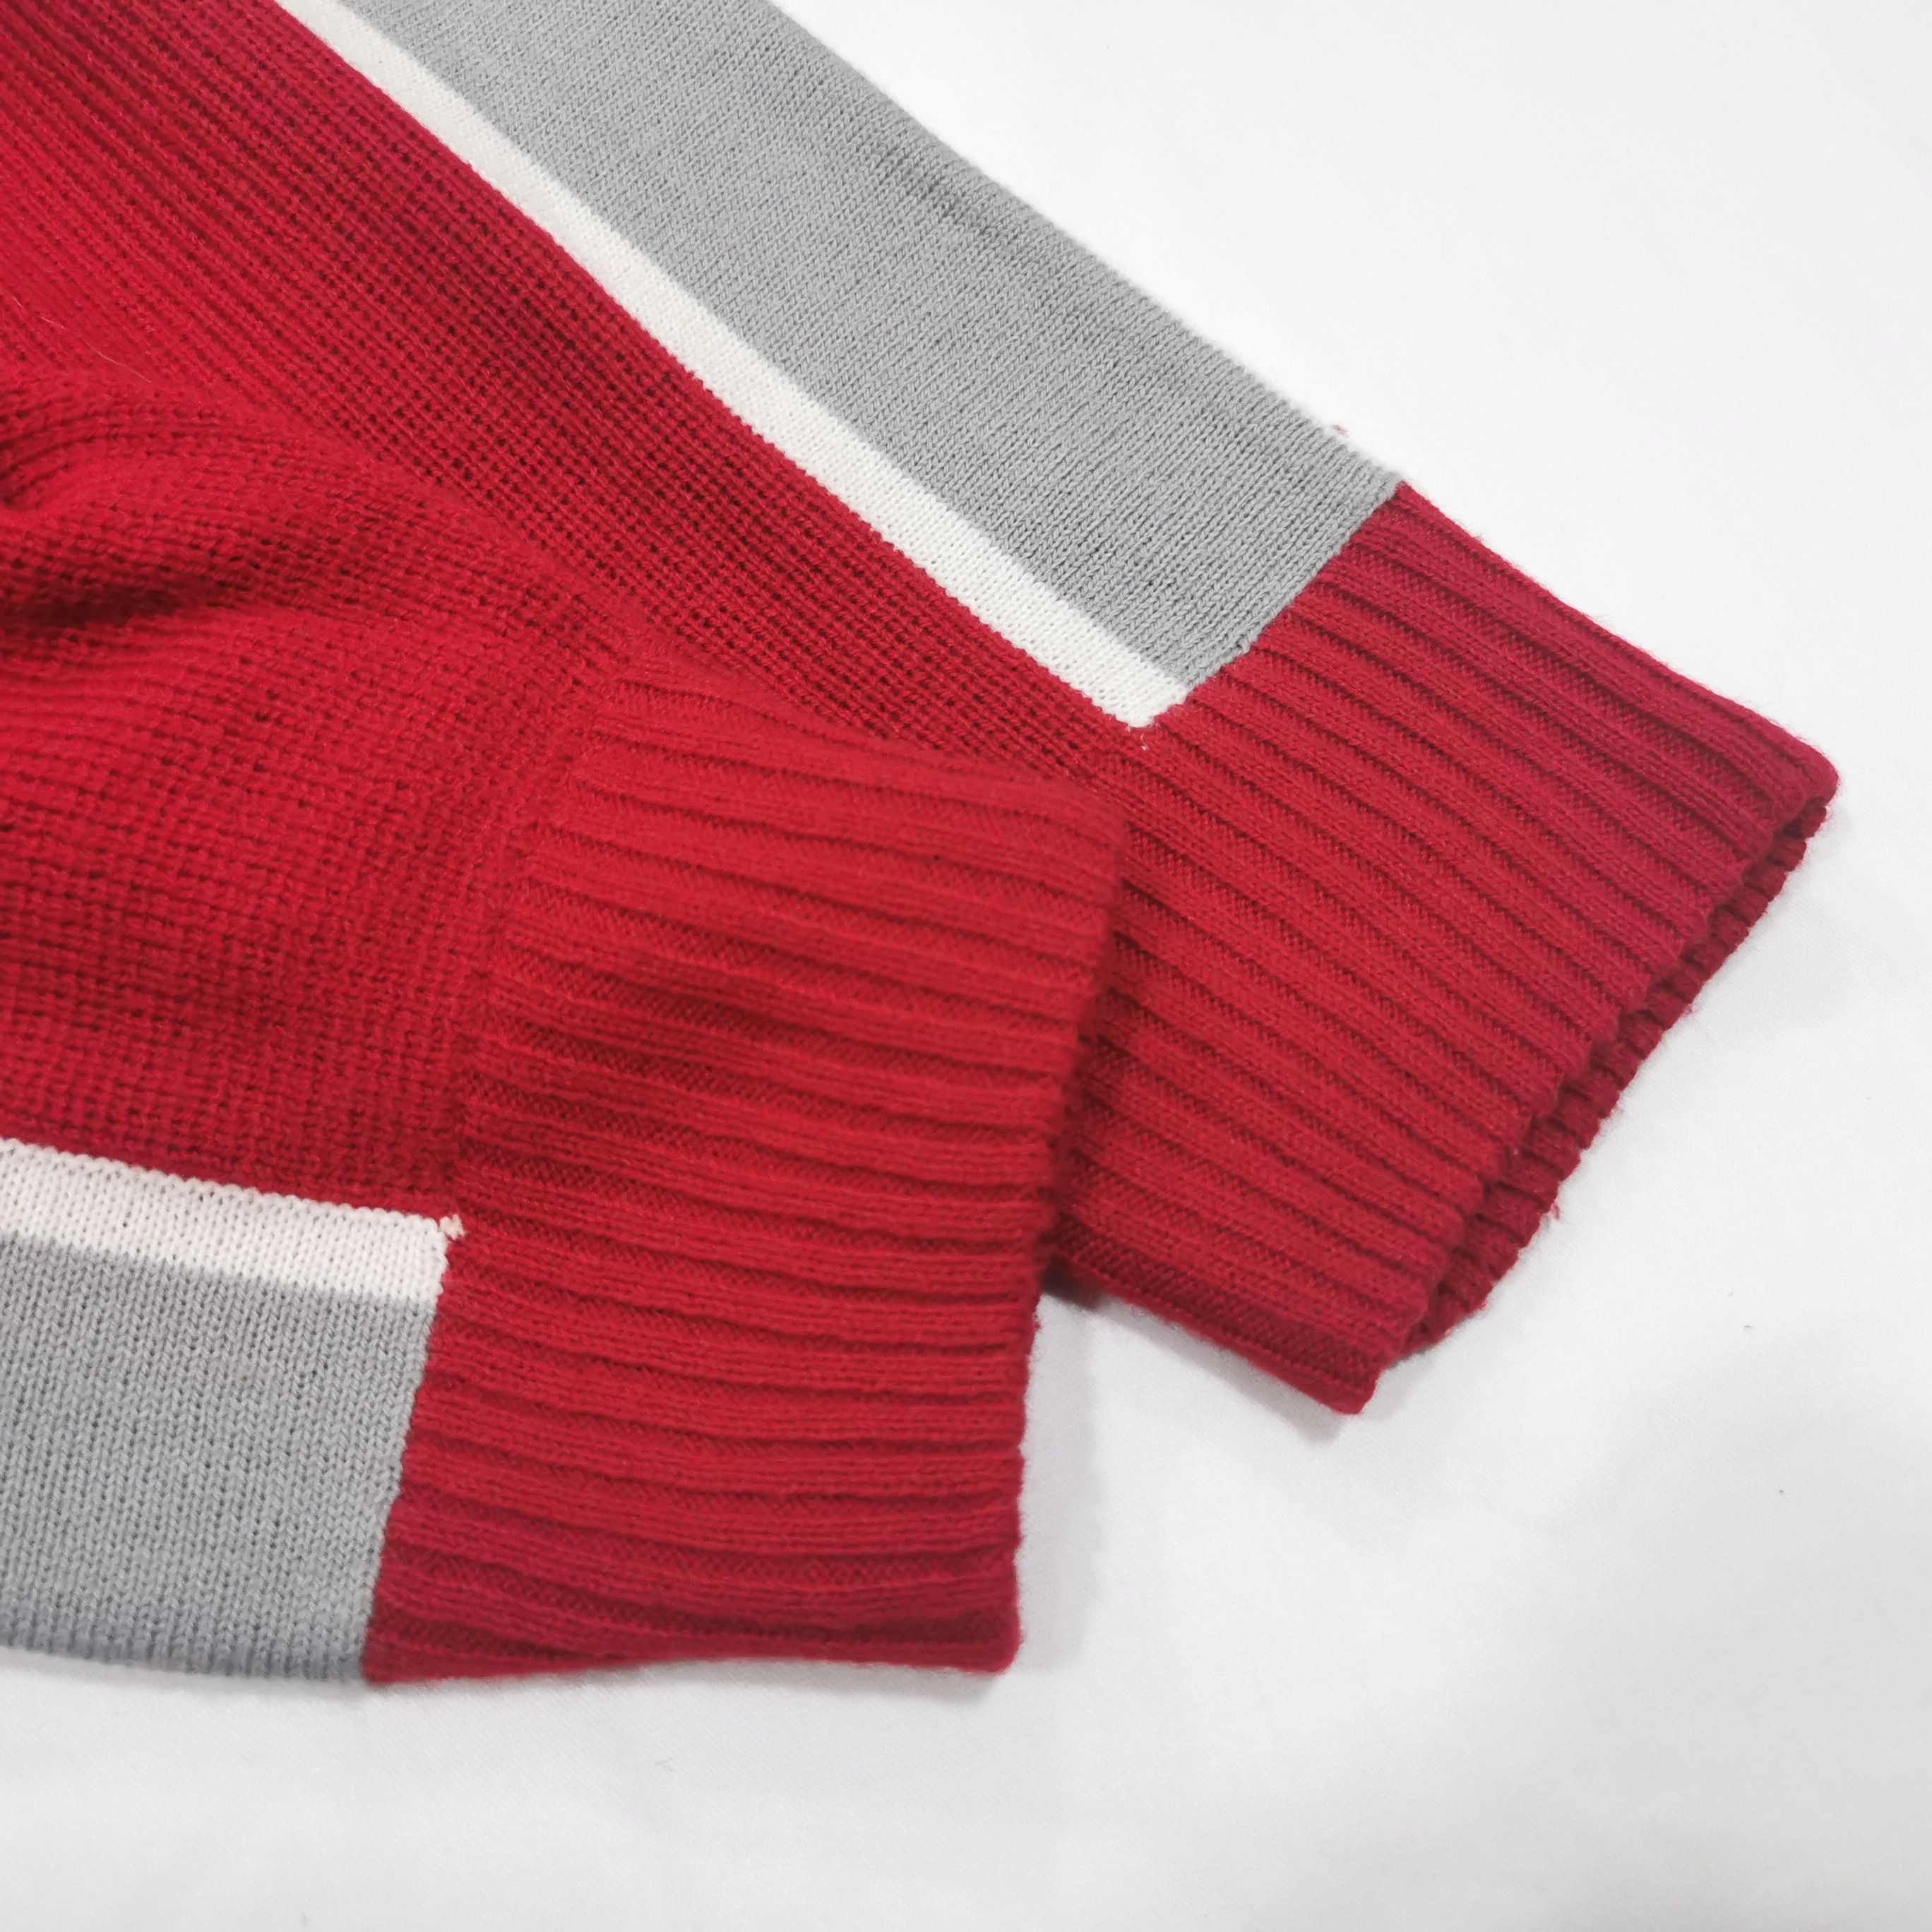 Vintage Vision Street Wear Knitted Sweaters - 9